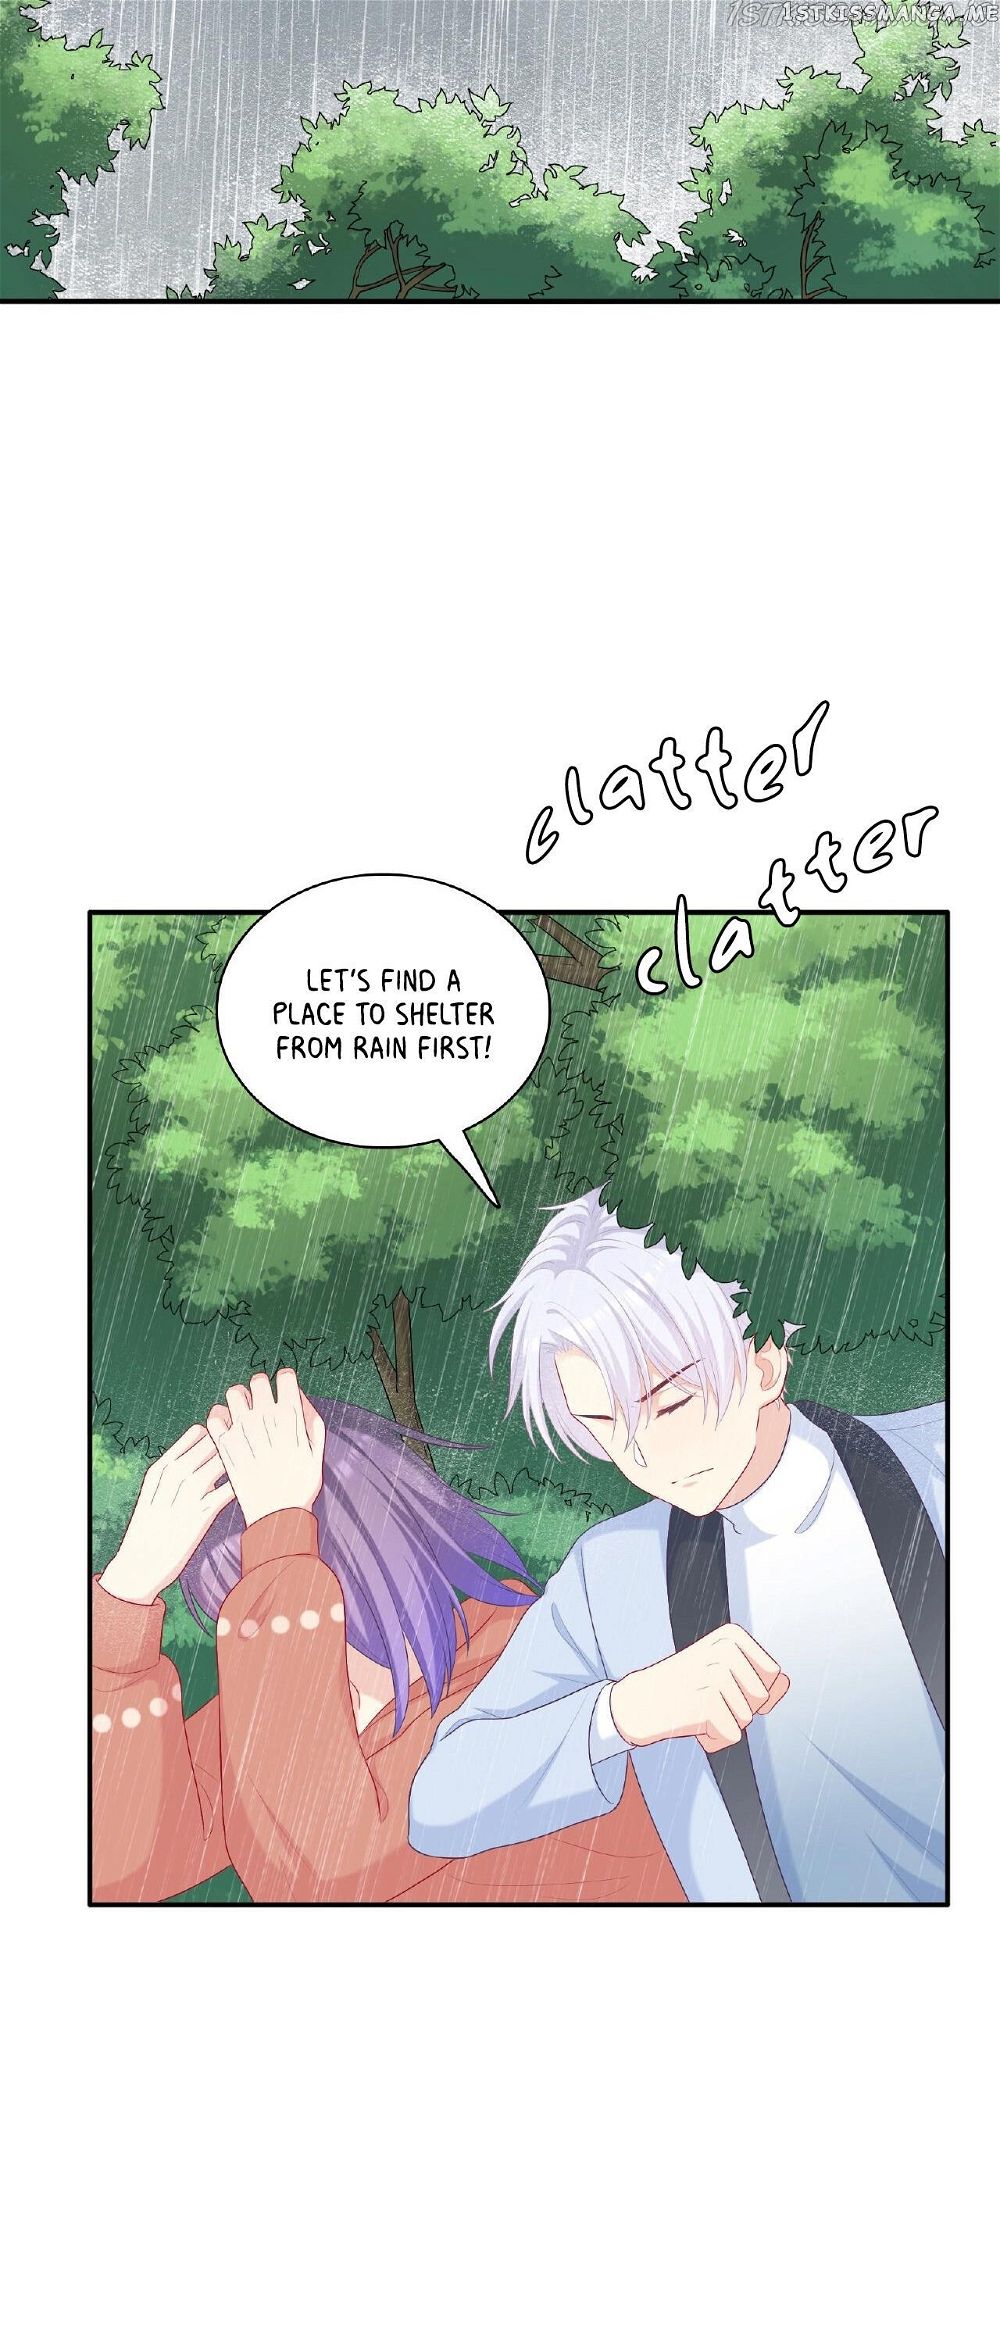 Fierce Girl and Sleeping Boy chapter 25 - Page 28